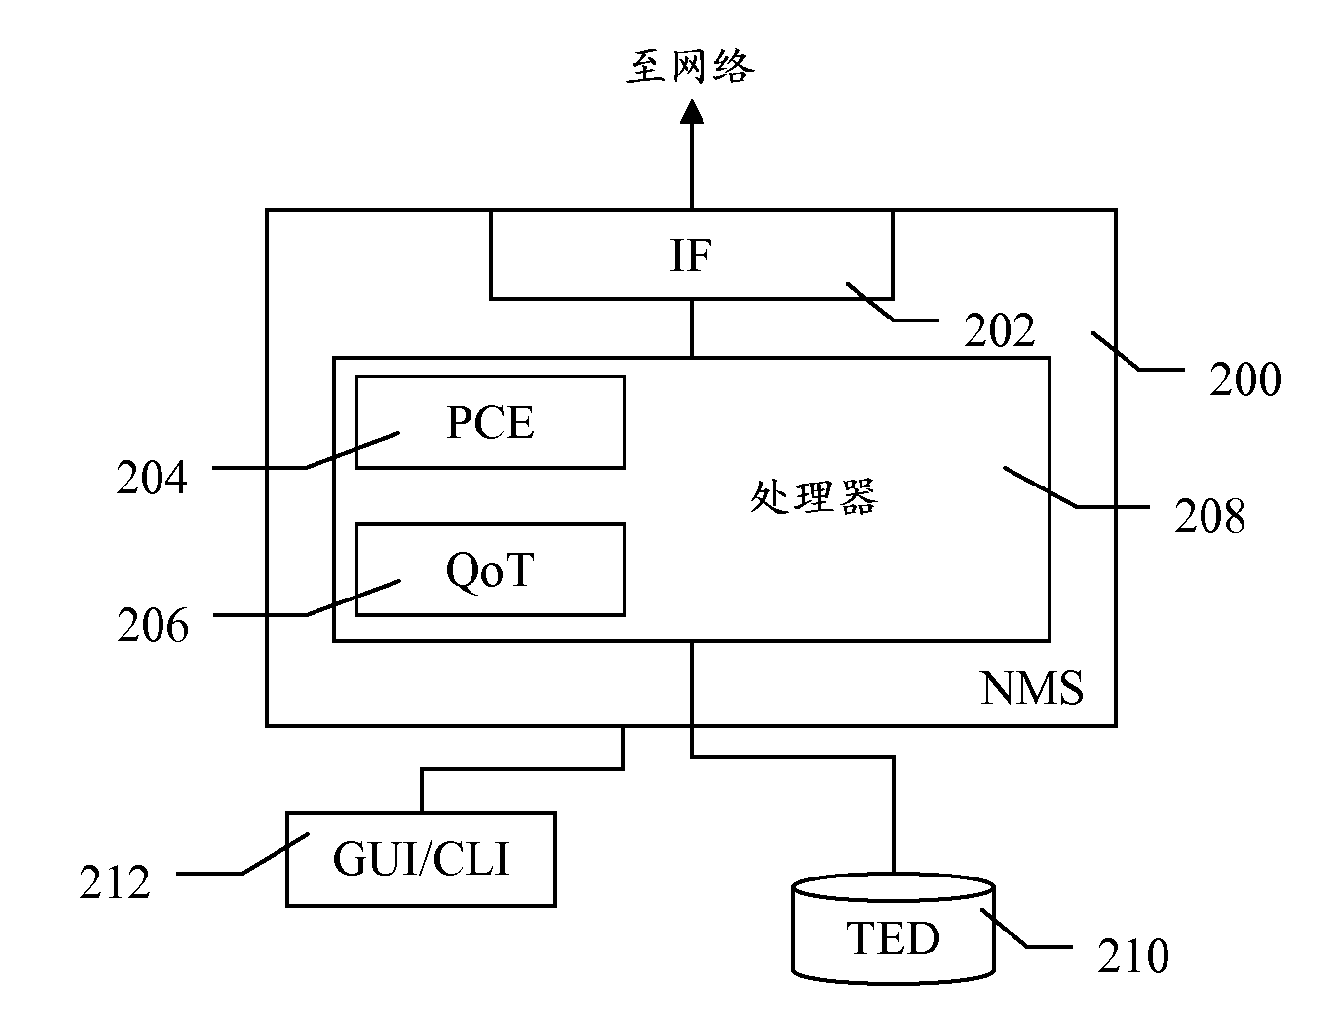 Method and apparatus for dynamic wavelength allocation in Wavelength switched optical networks